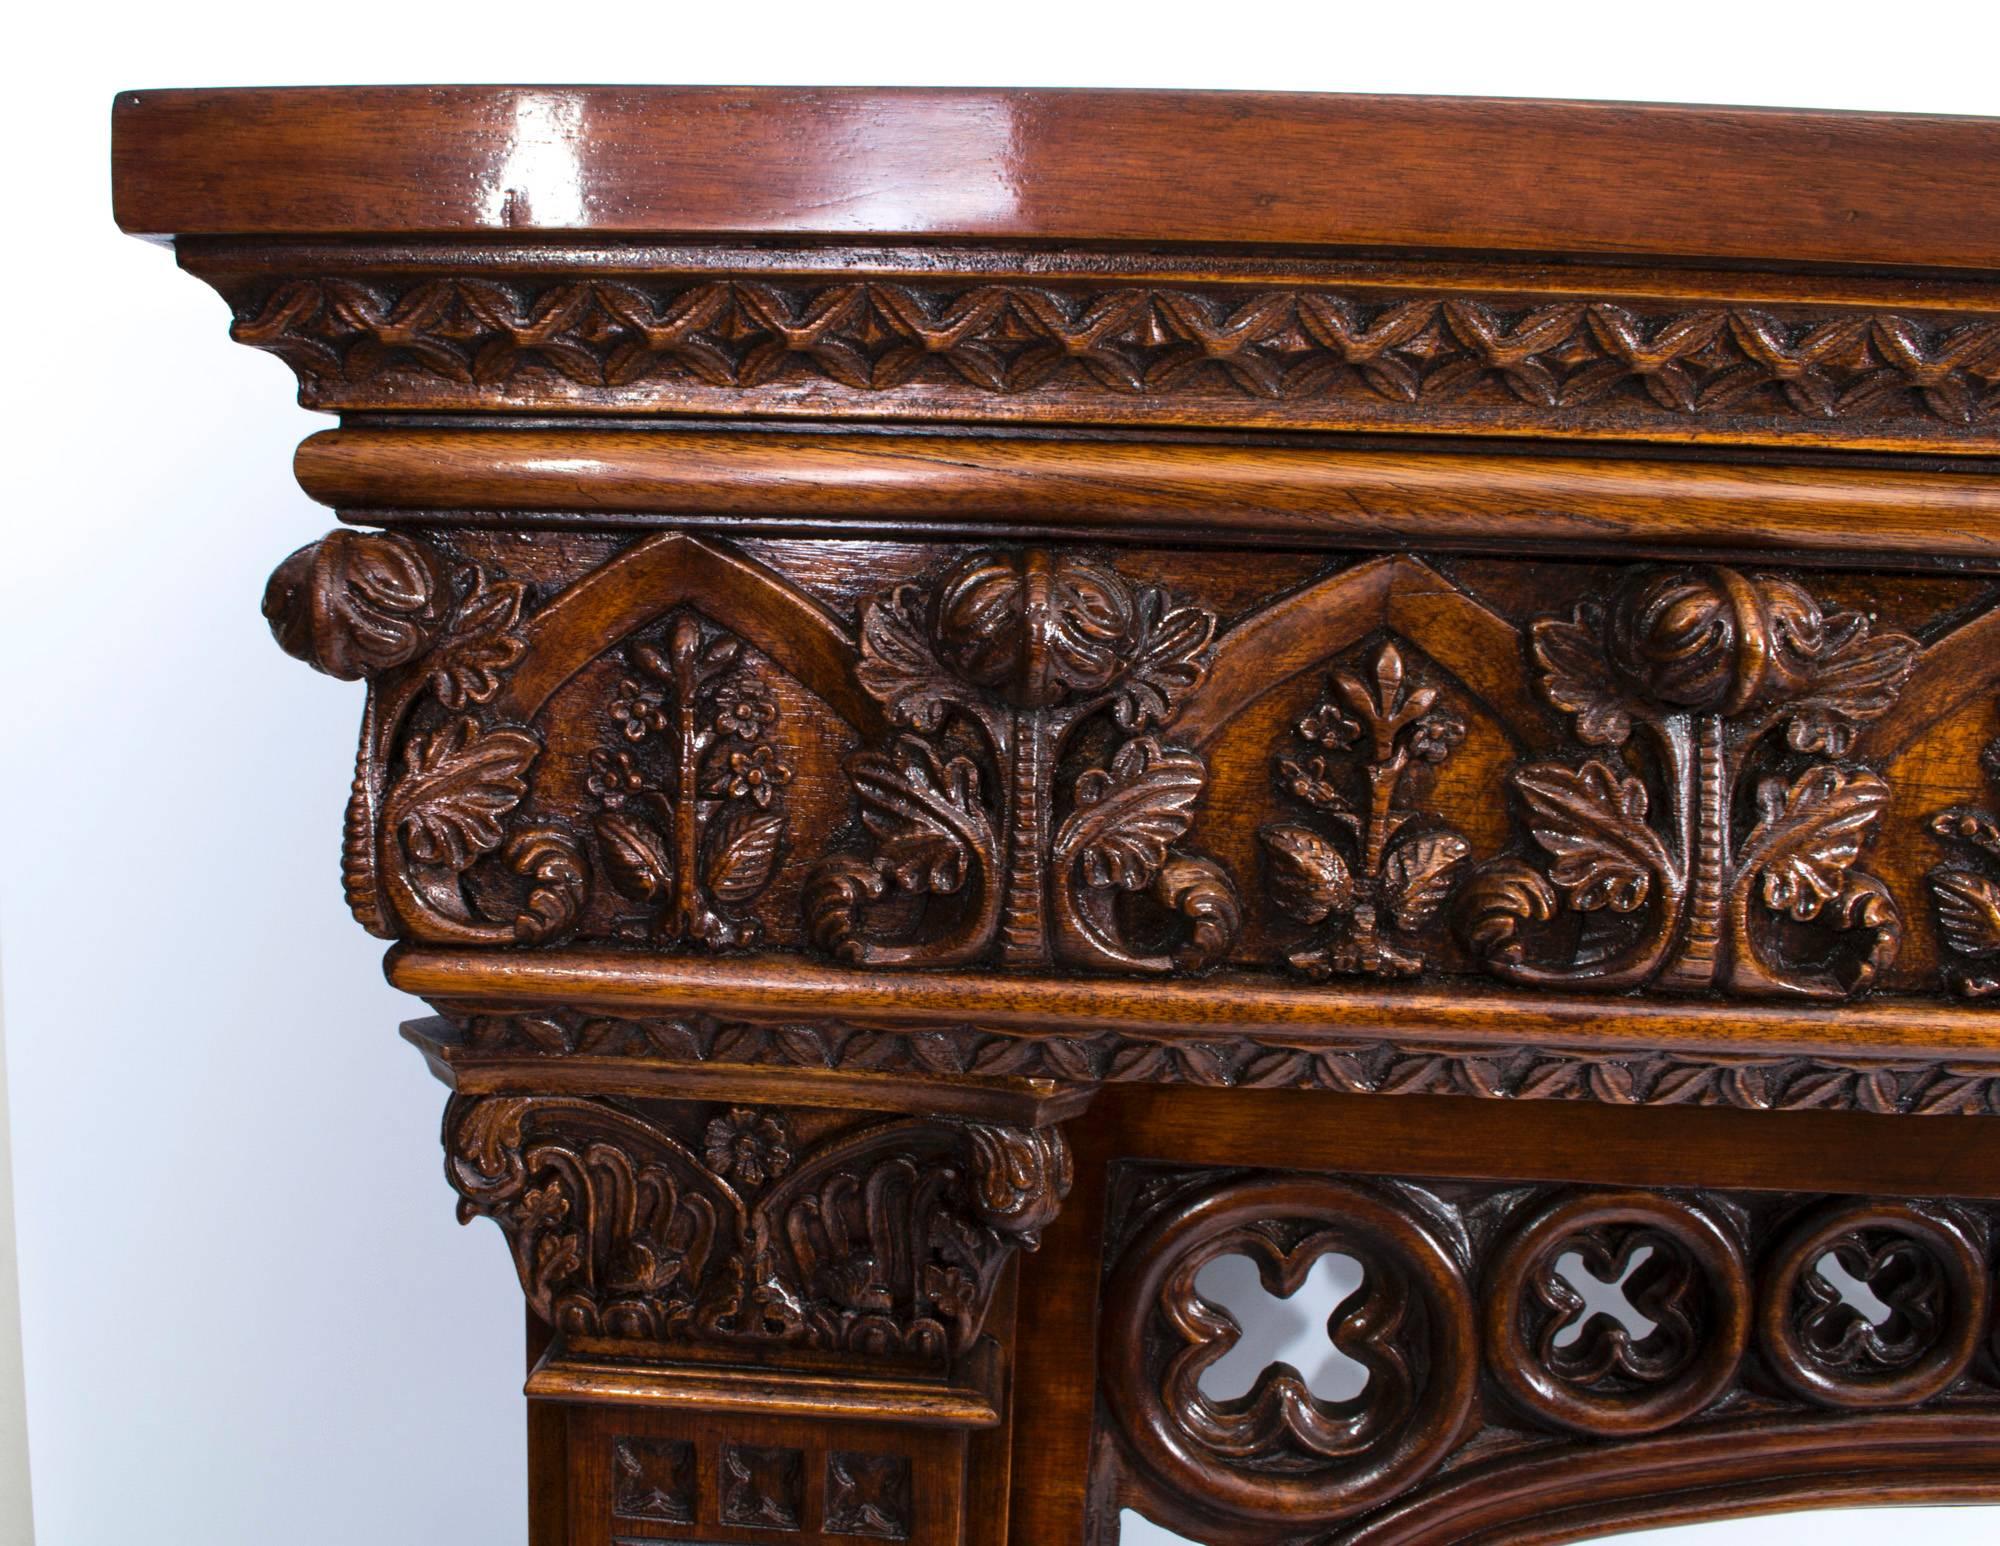 This is a large impressive and profusely carved solid mahogany chimney piece in the neo-Gothic style of A. W. N Pugin, dating from the early 20th century.

It has a contoured shelf over Puginesque foliate carved decoration with an open clover leaf